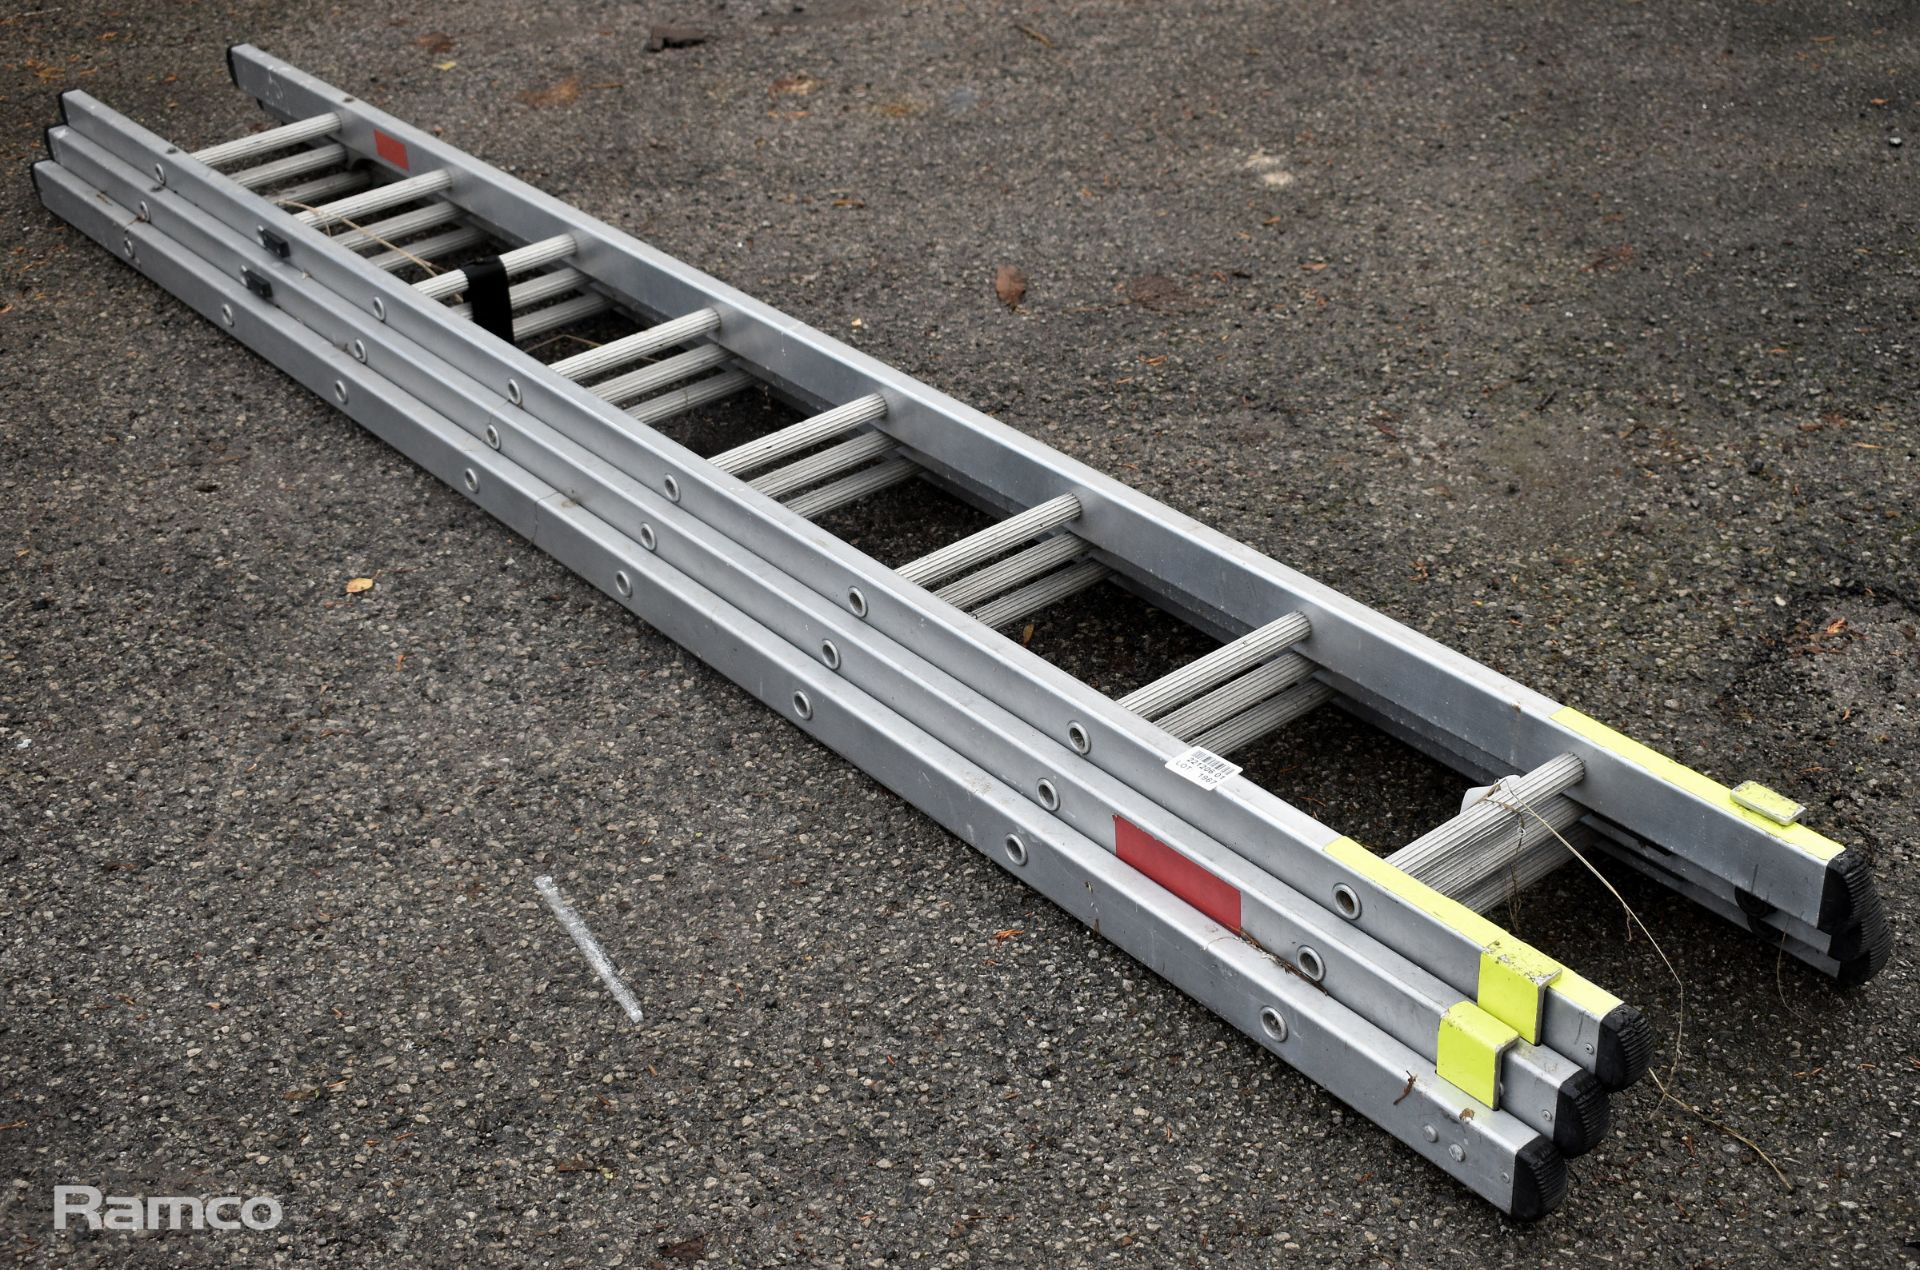 Ex - Fire & Rescue, 8 rung / 9ft, triple extension ladder - opens to approx 25ft